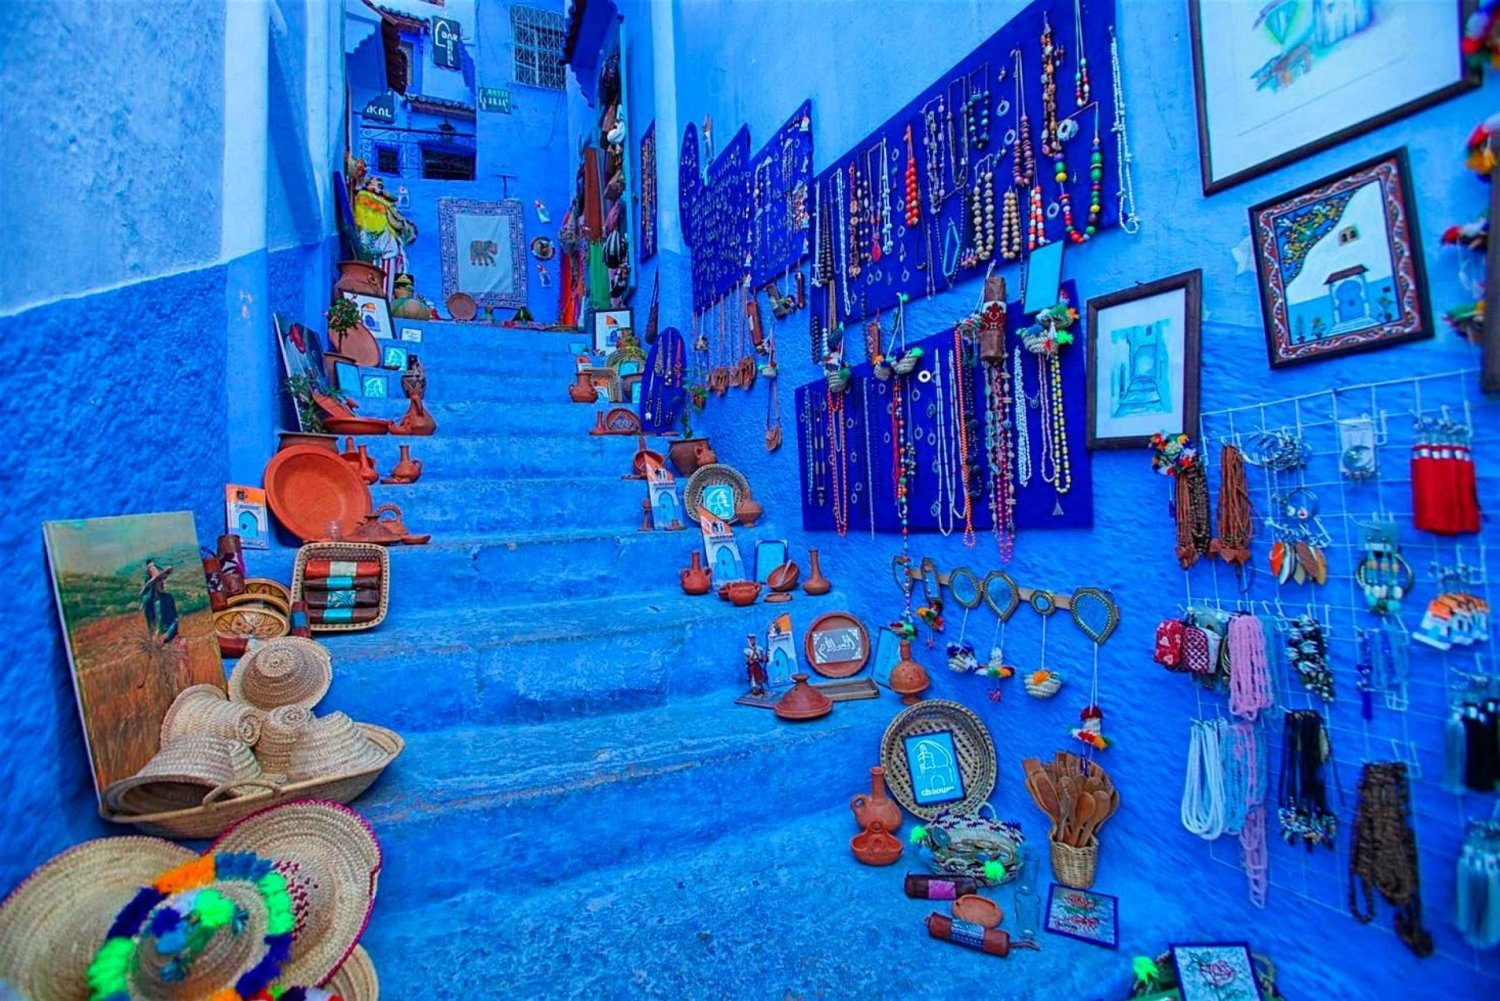 From Malaga: Private Tour of Chefchaouen